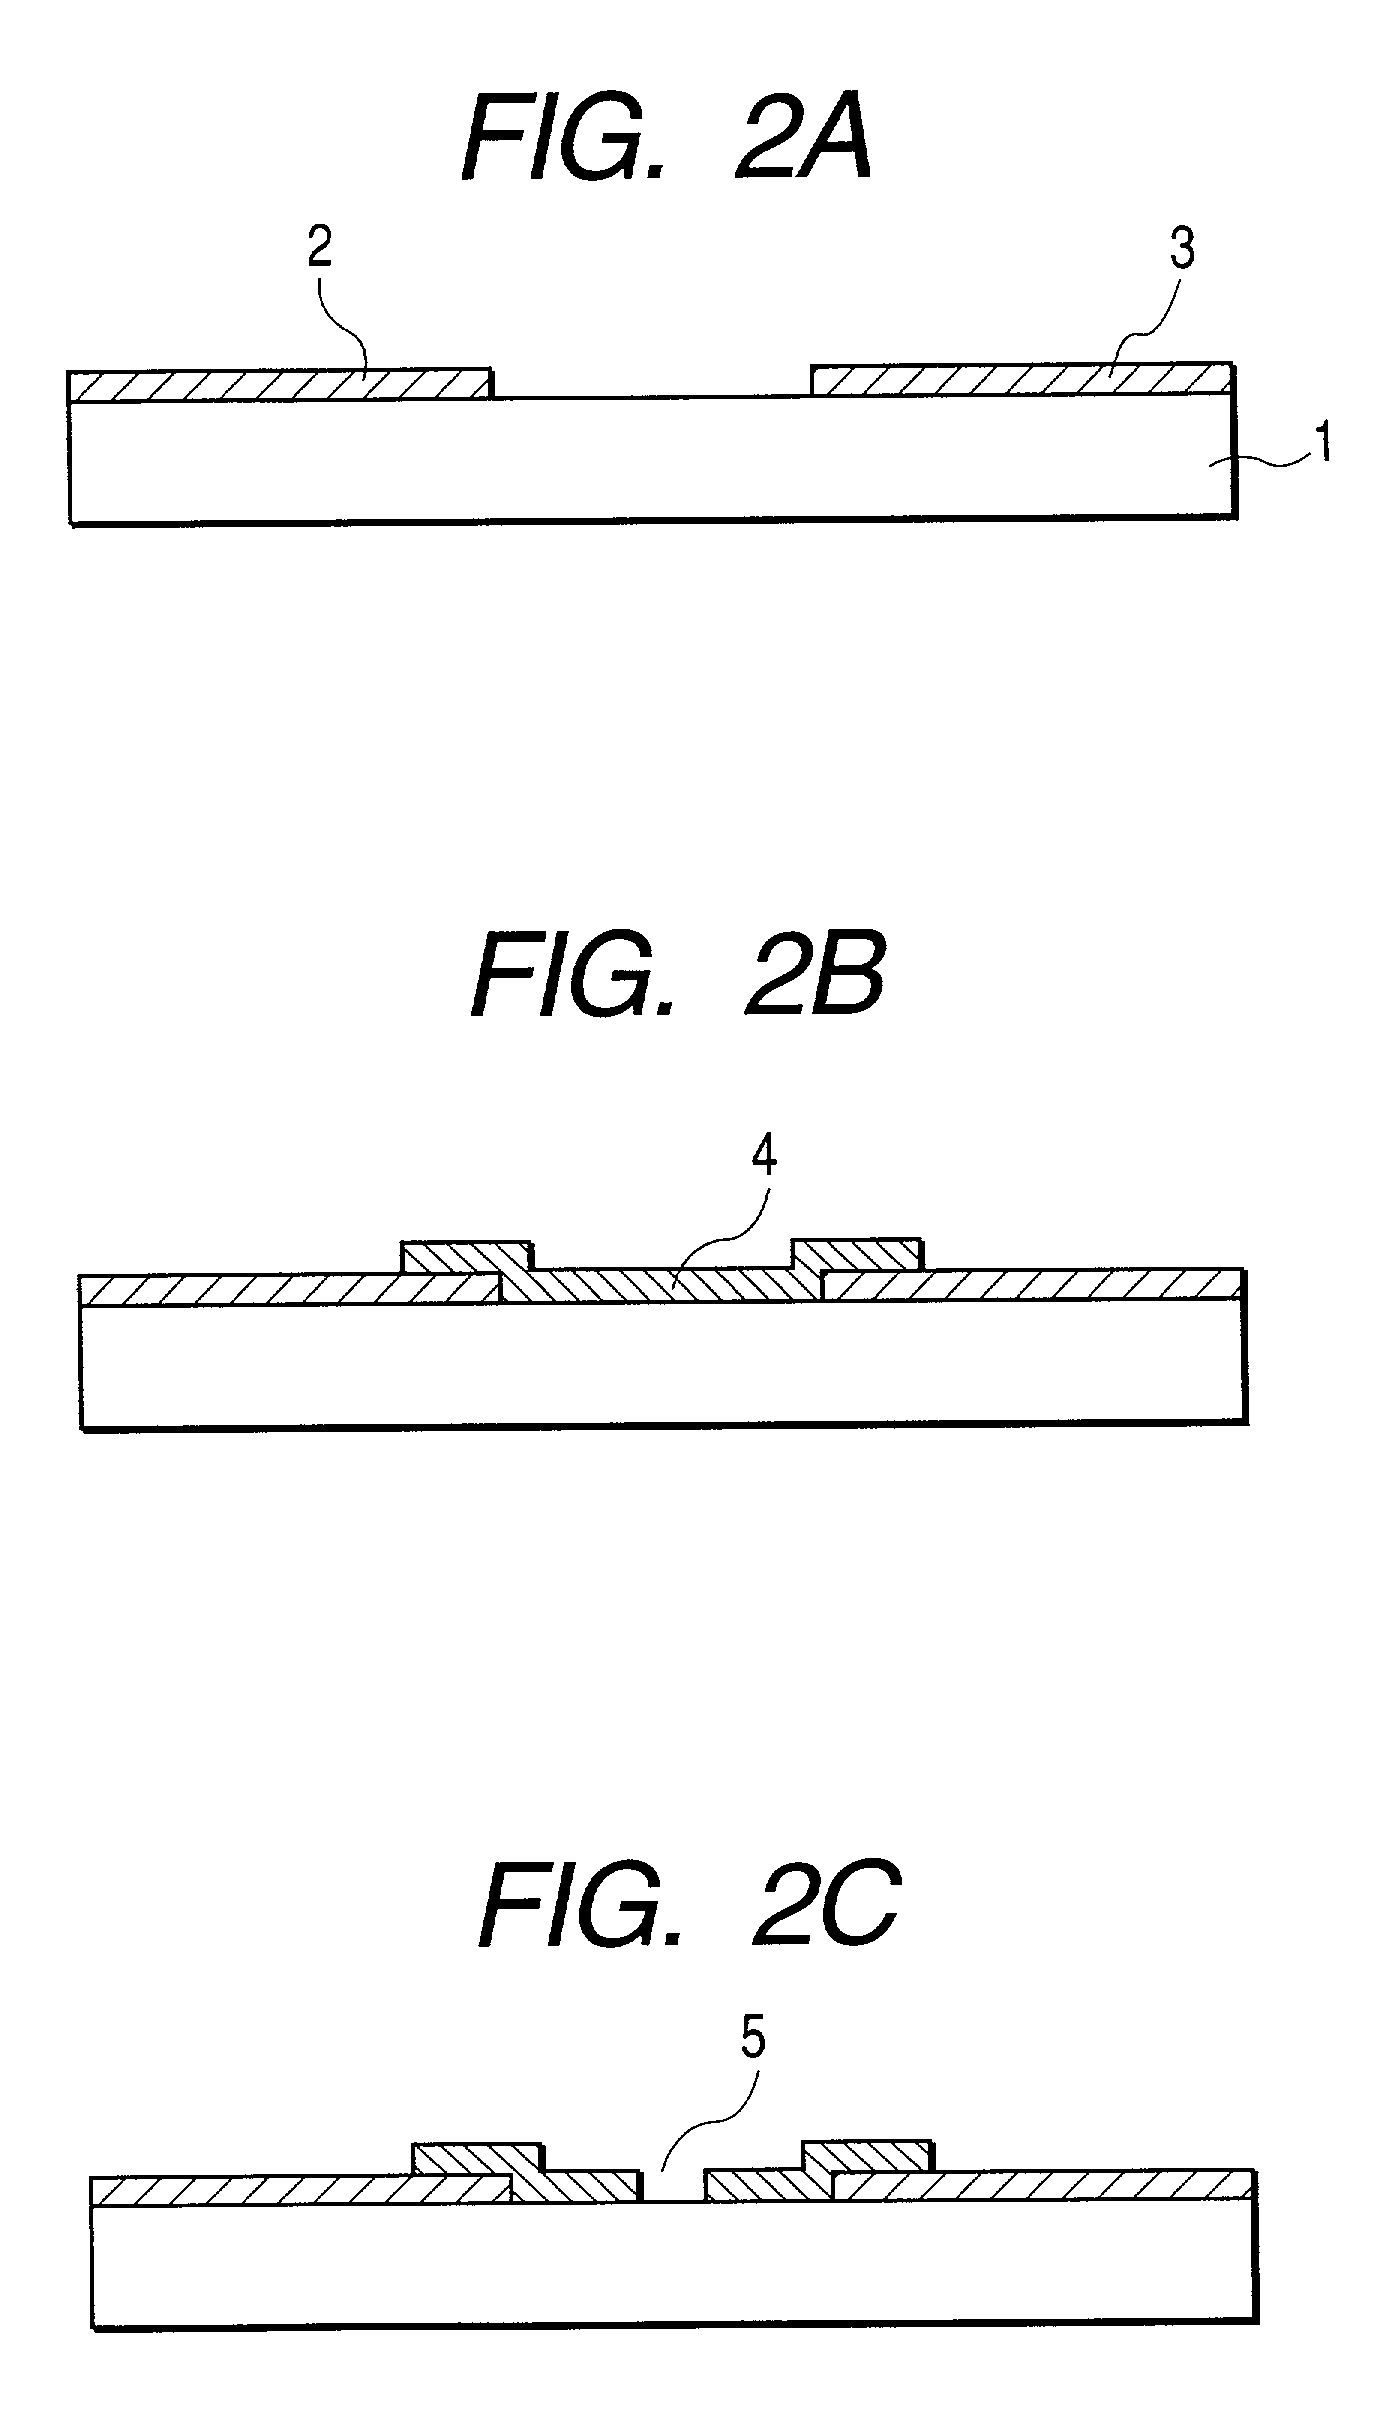 Method for manufacturing image-forming apparatus involving changing a polymer film into an electroconductive film